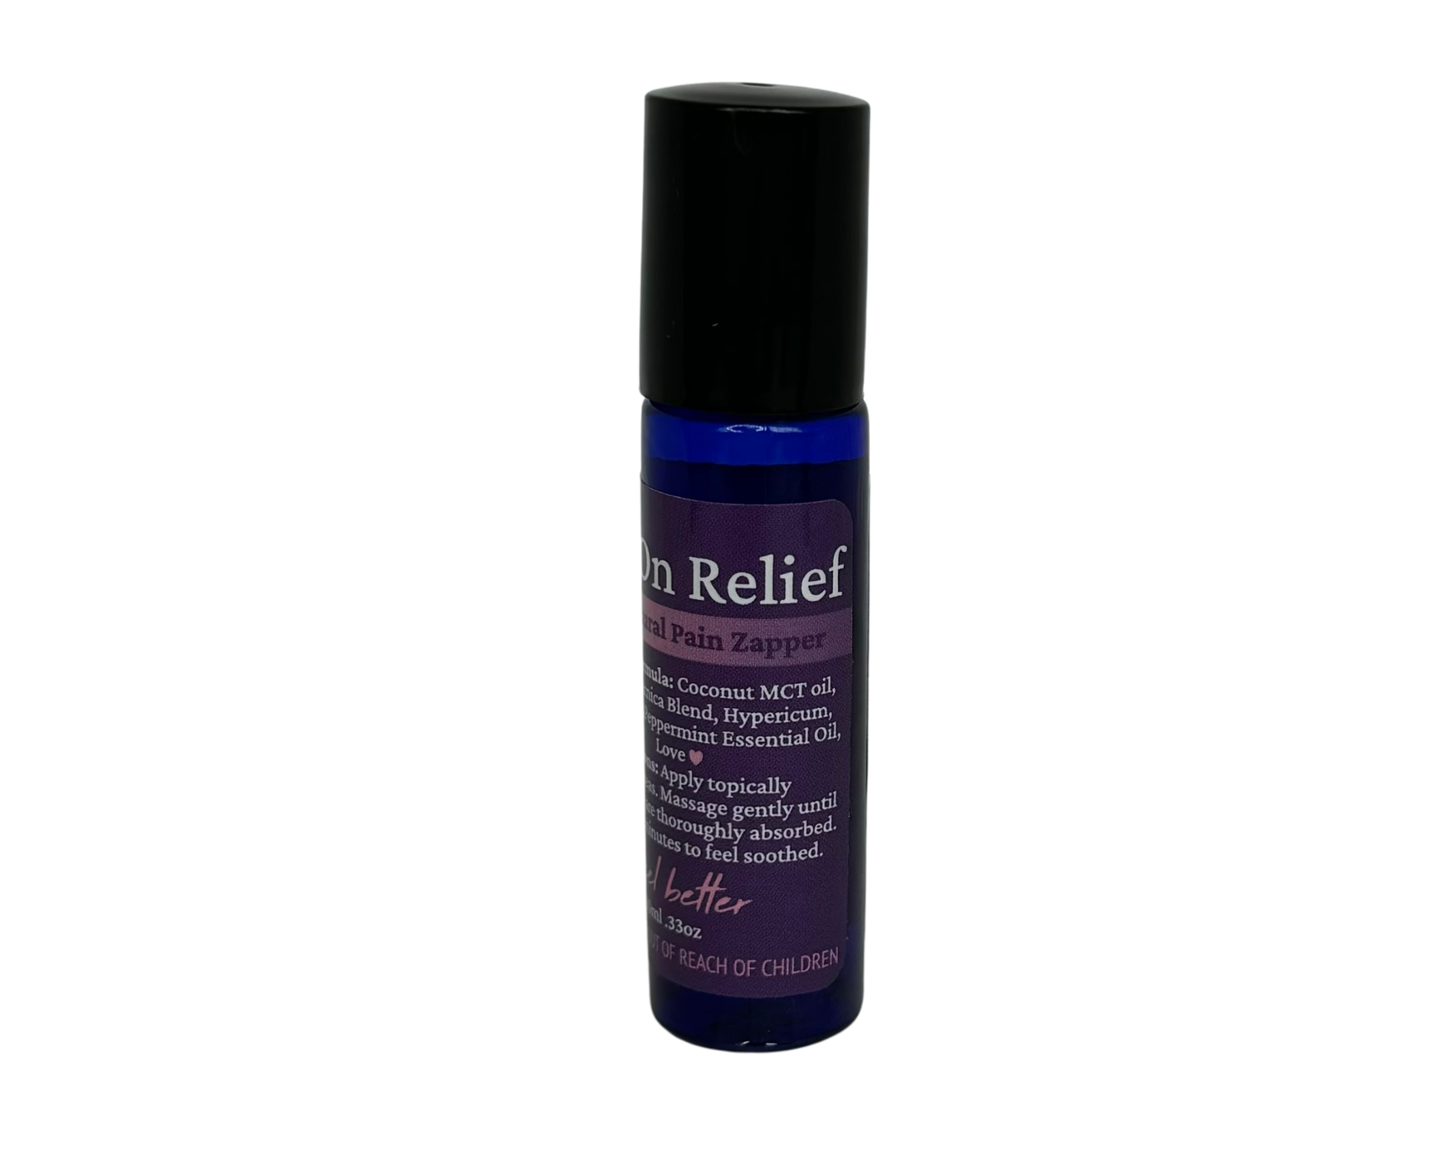 ROLL ON RELIEF 10ml